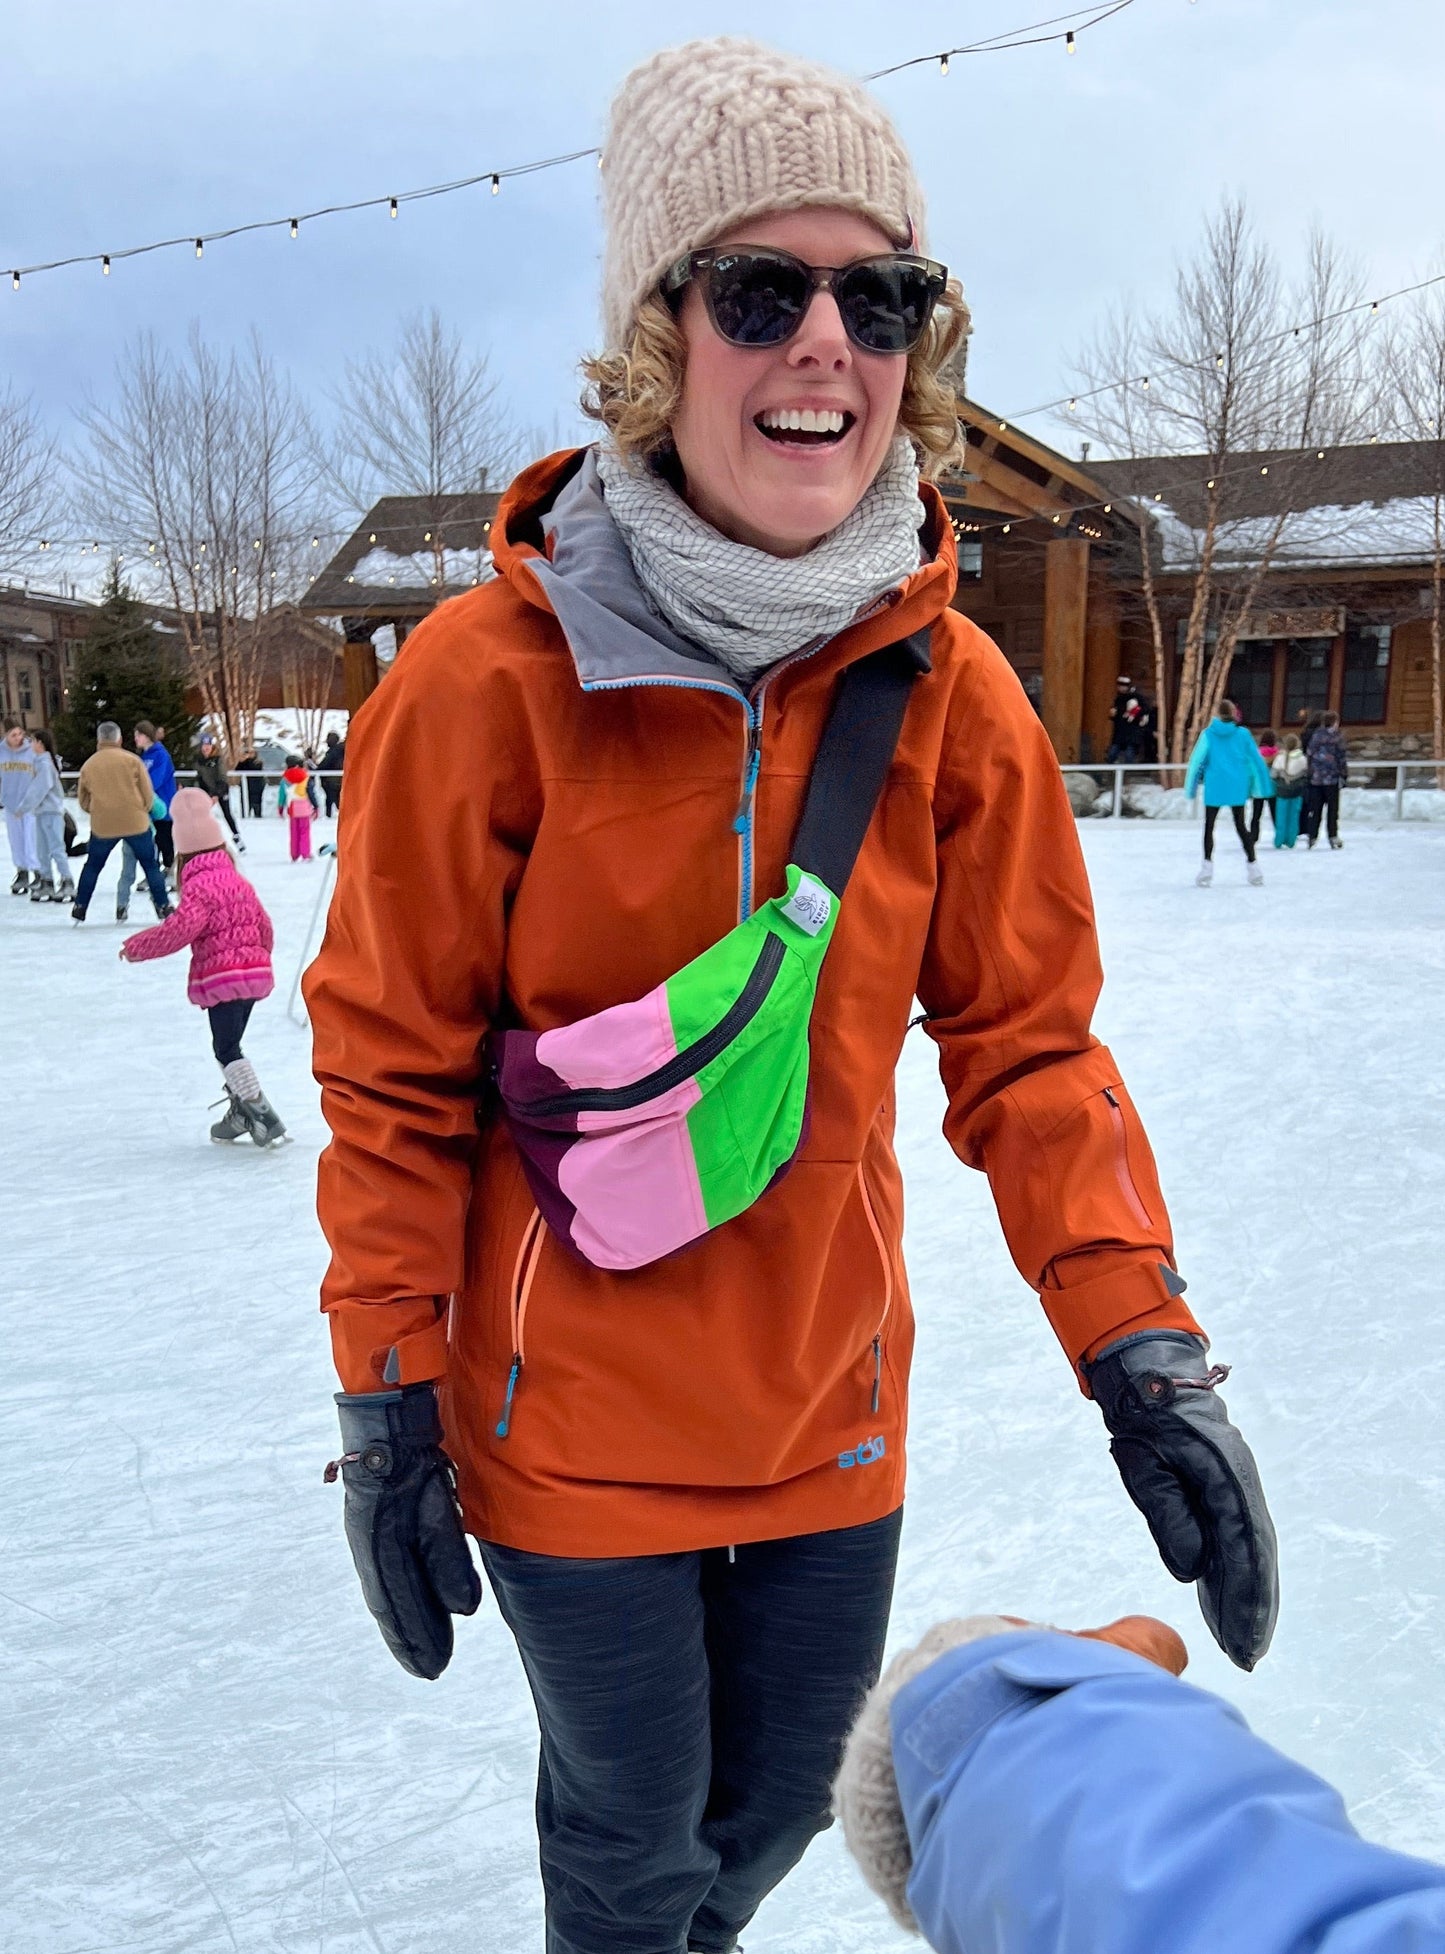 woman smiling while ice skating with a bright colored fanny pack